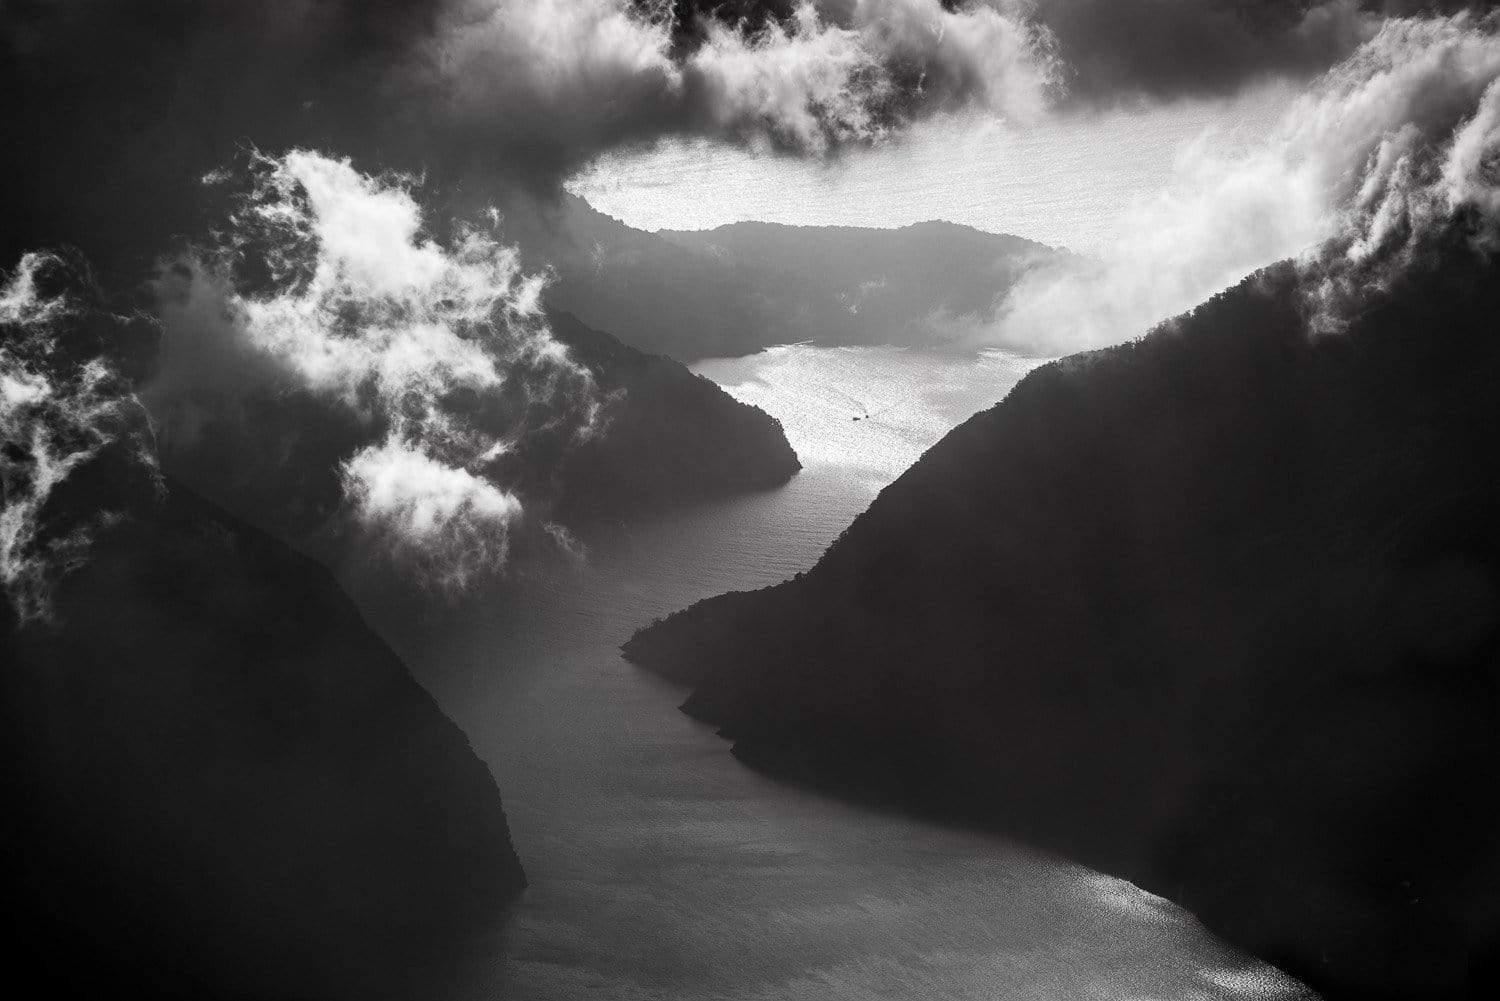 A dark view storm, smoky clouds interesting the giant black cliffs, Approaching Strom, Milford Sound